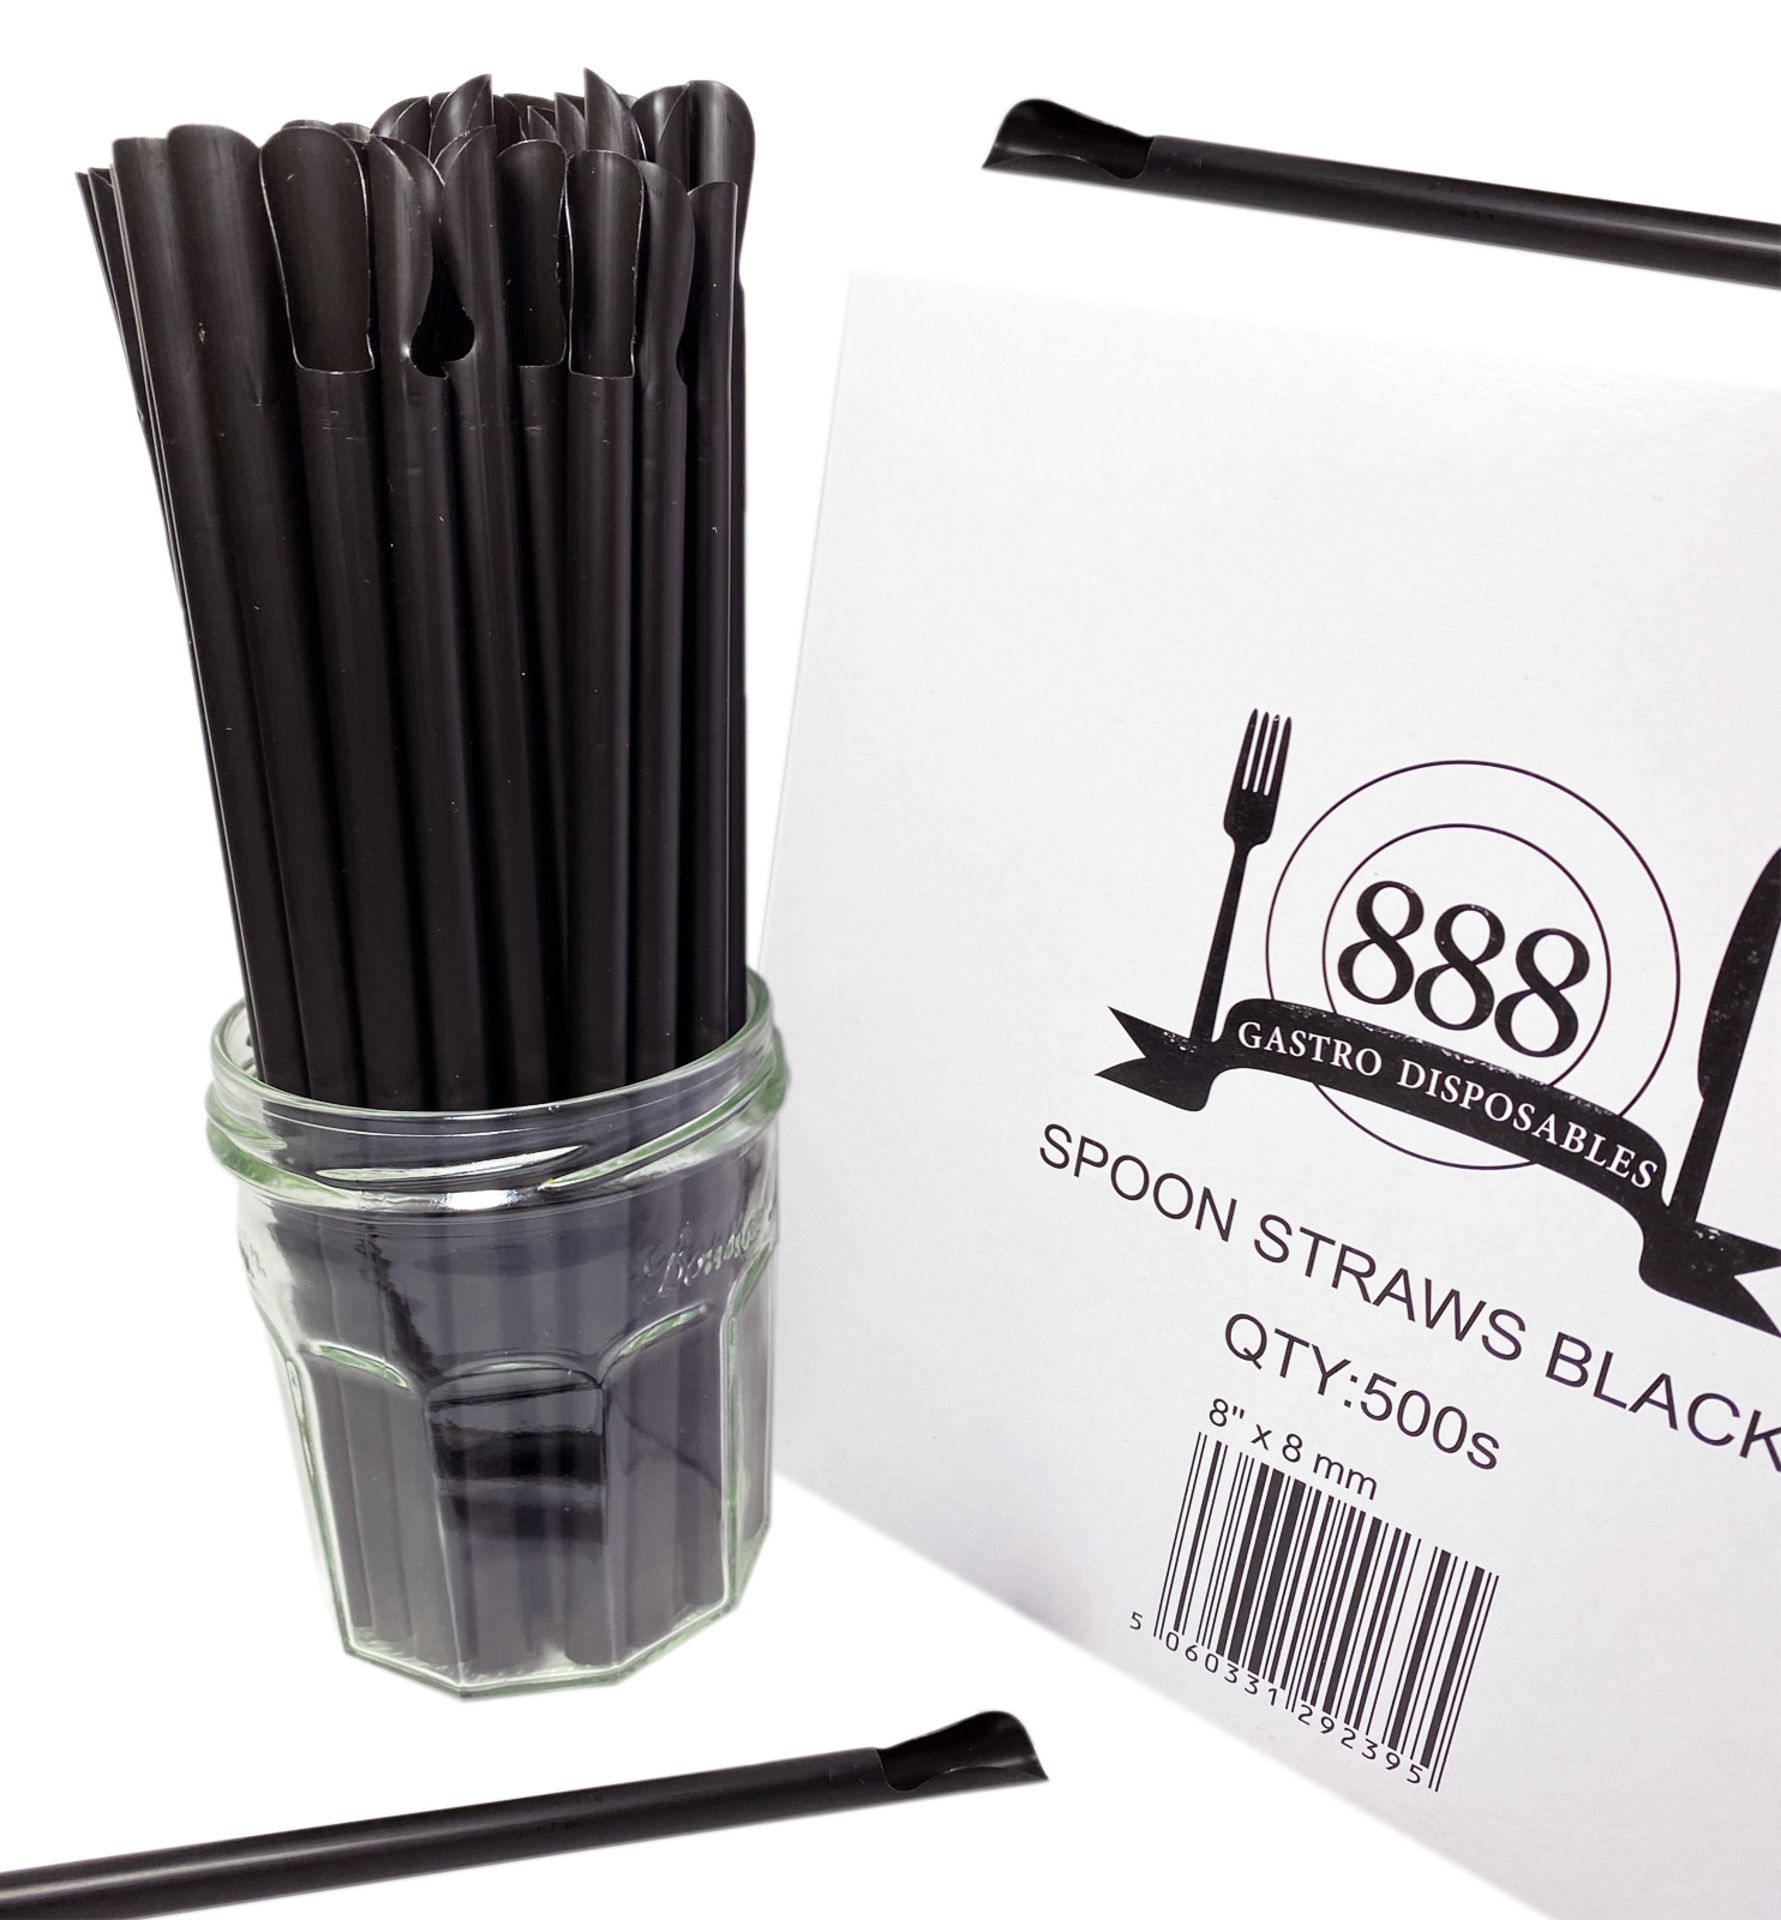 5 x Boxes of Black Spoon Straws by 888 Gastro Disposables